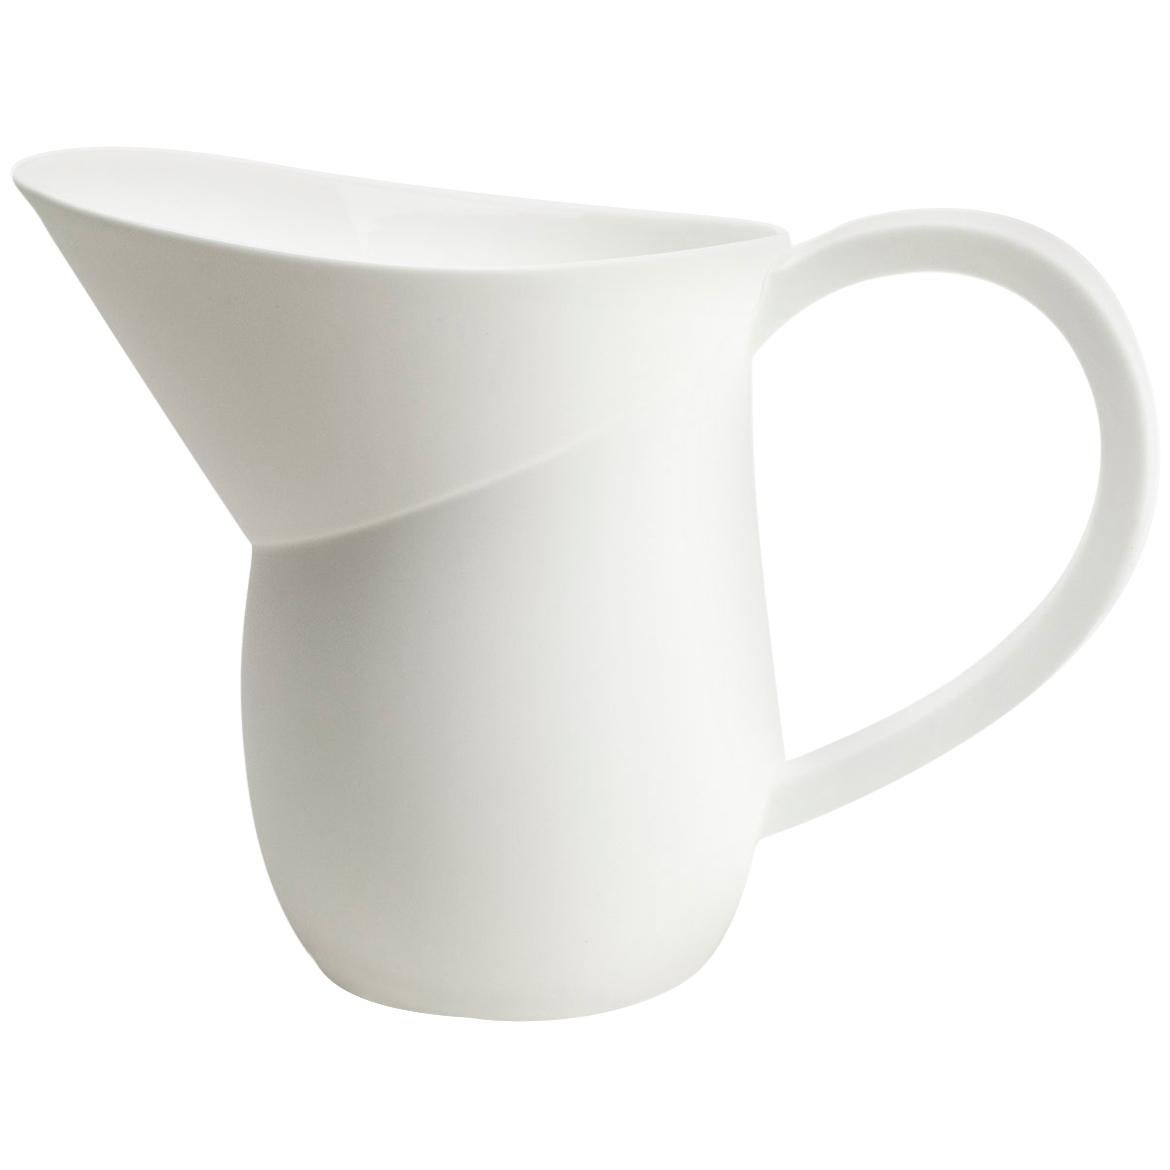 Fine Bone China Jug Sculpted with Generous and Curvaceous Forms